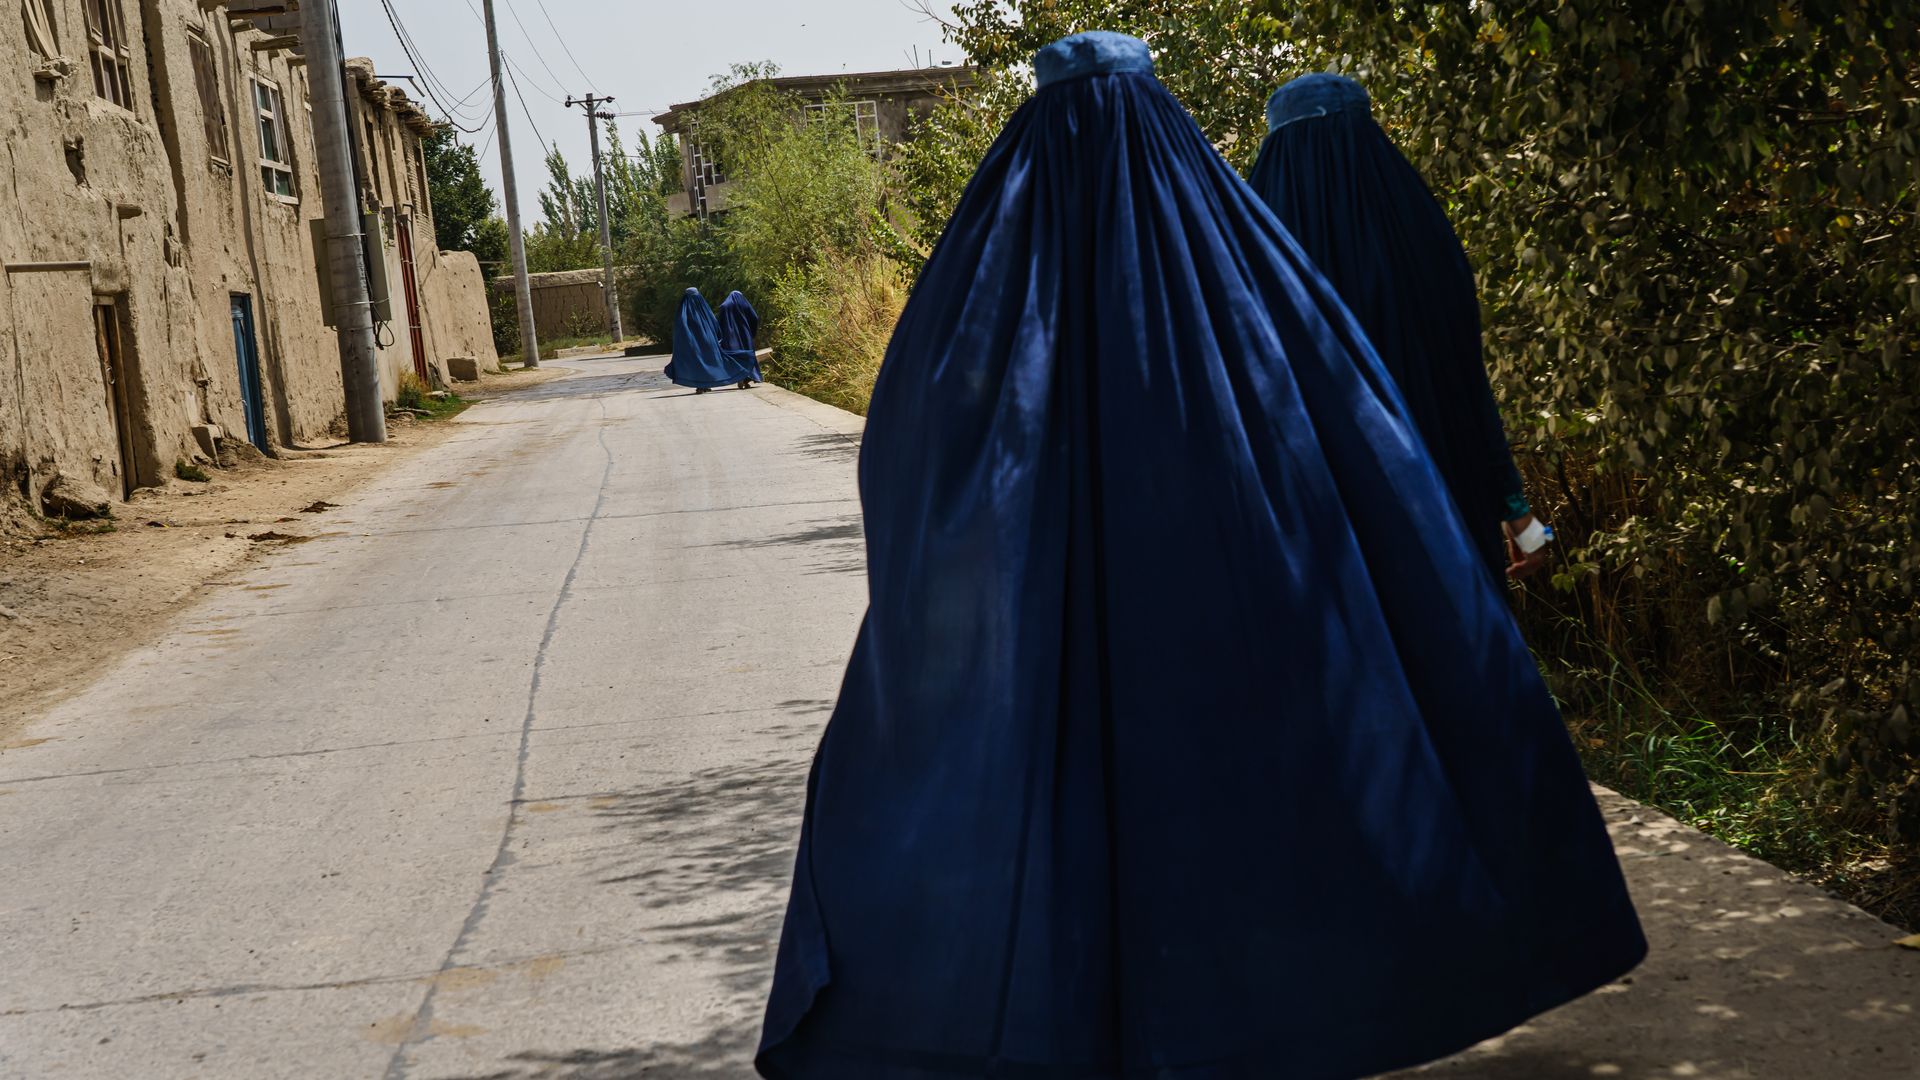 Women in Puli Alam, Afghanistan. Photo: Marcus Yam/Los Angeles Times via Getty Images